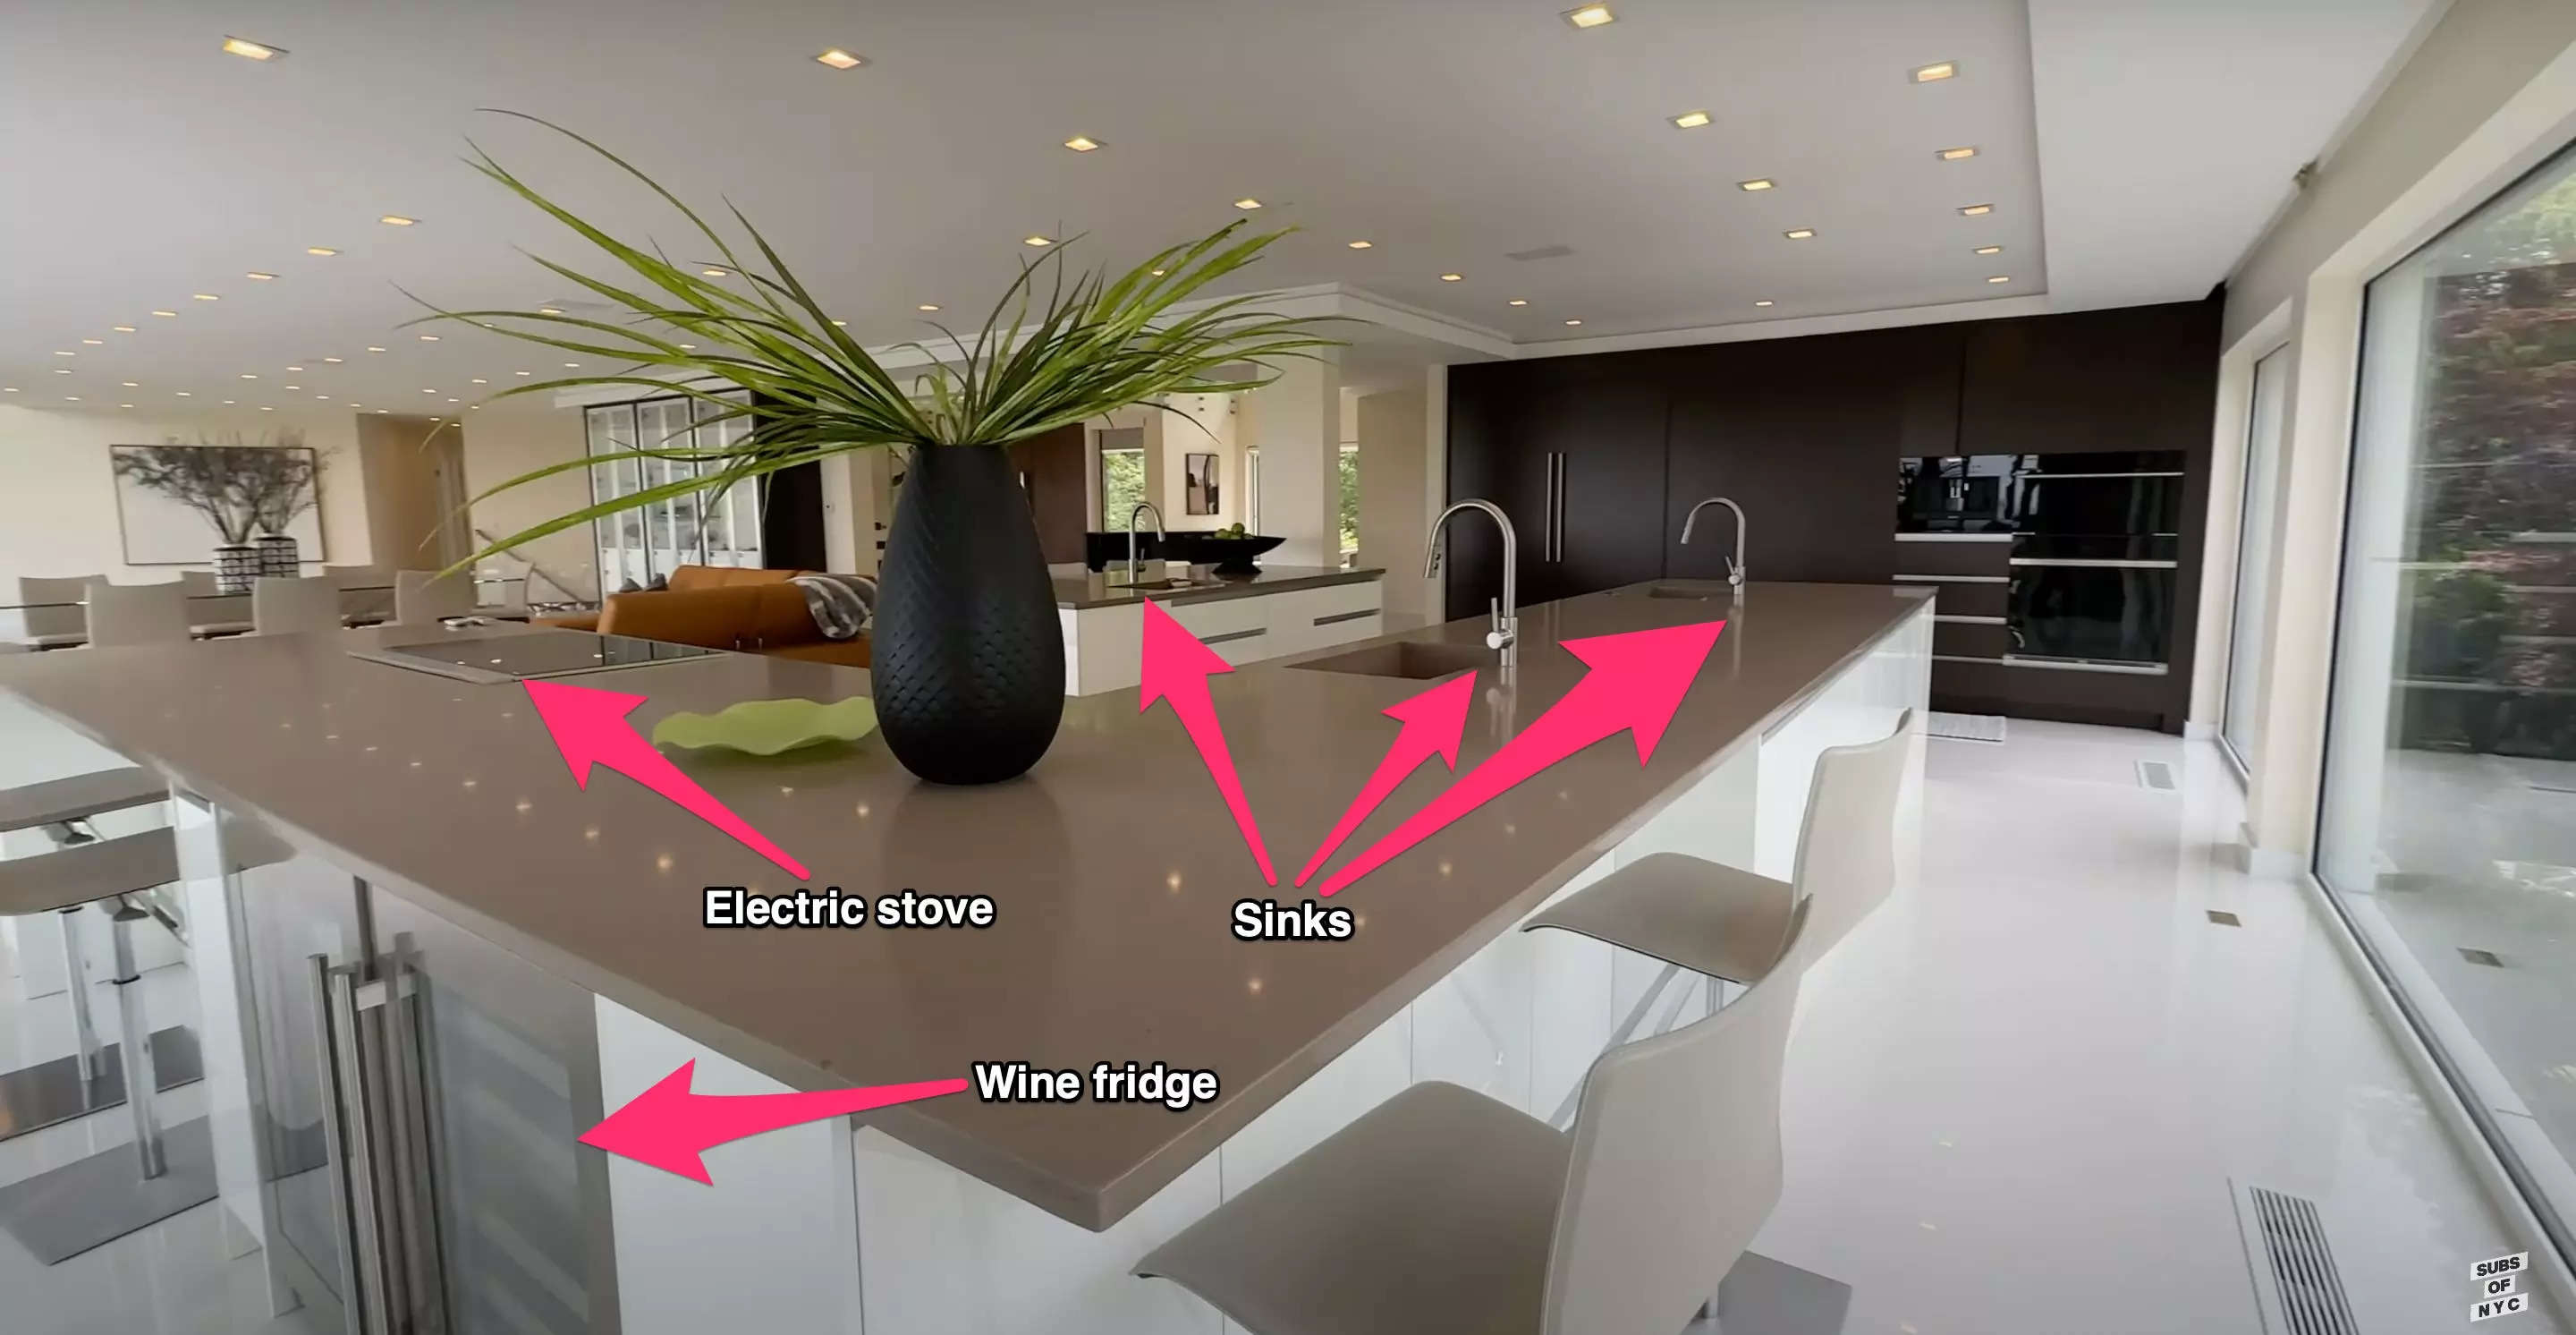 A modern kitchen with pink arrows pointing to the wine fridge, electric stove, and three sinks.